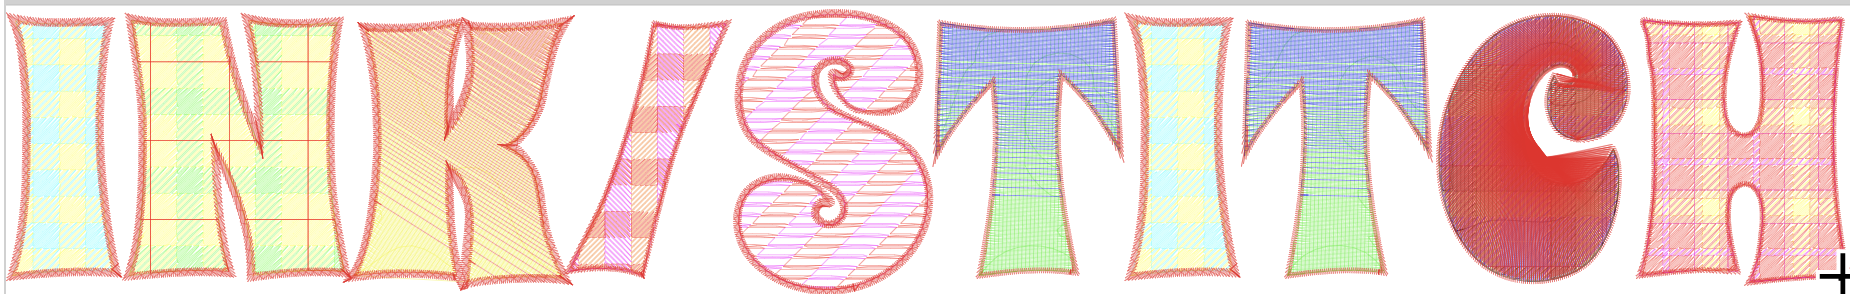 Text with tartan and gradient fill